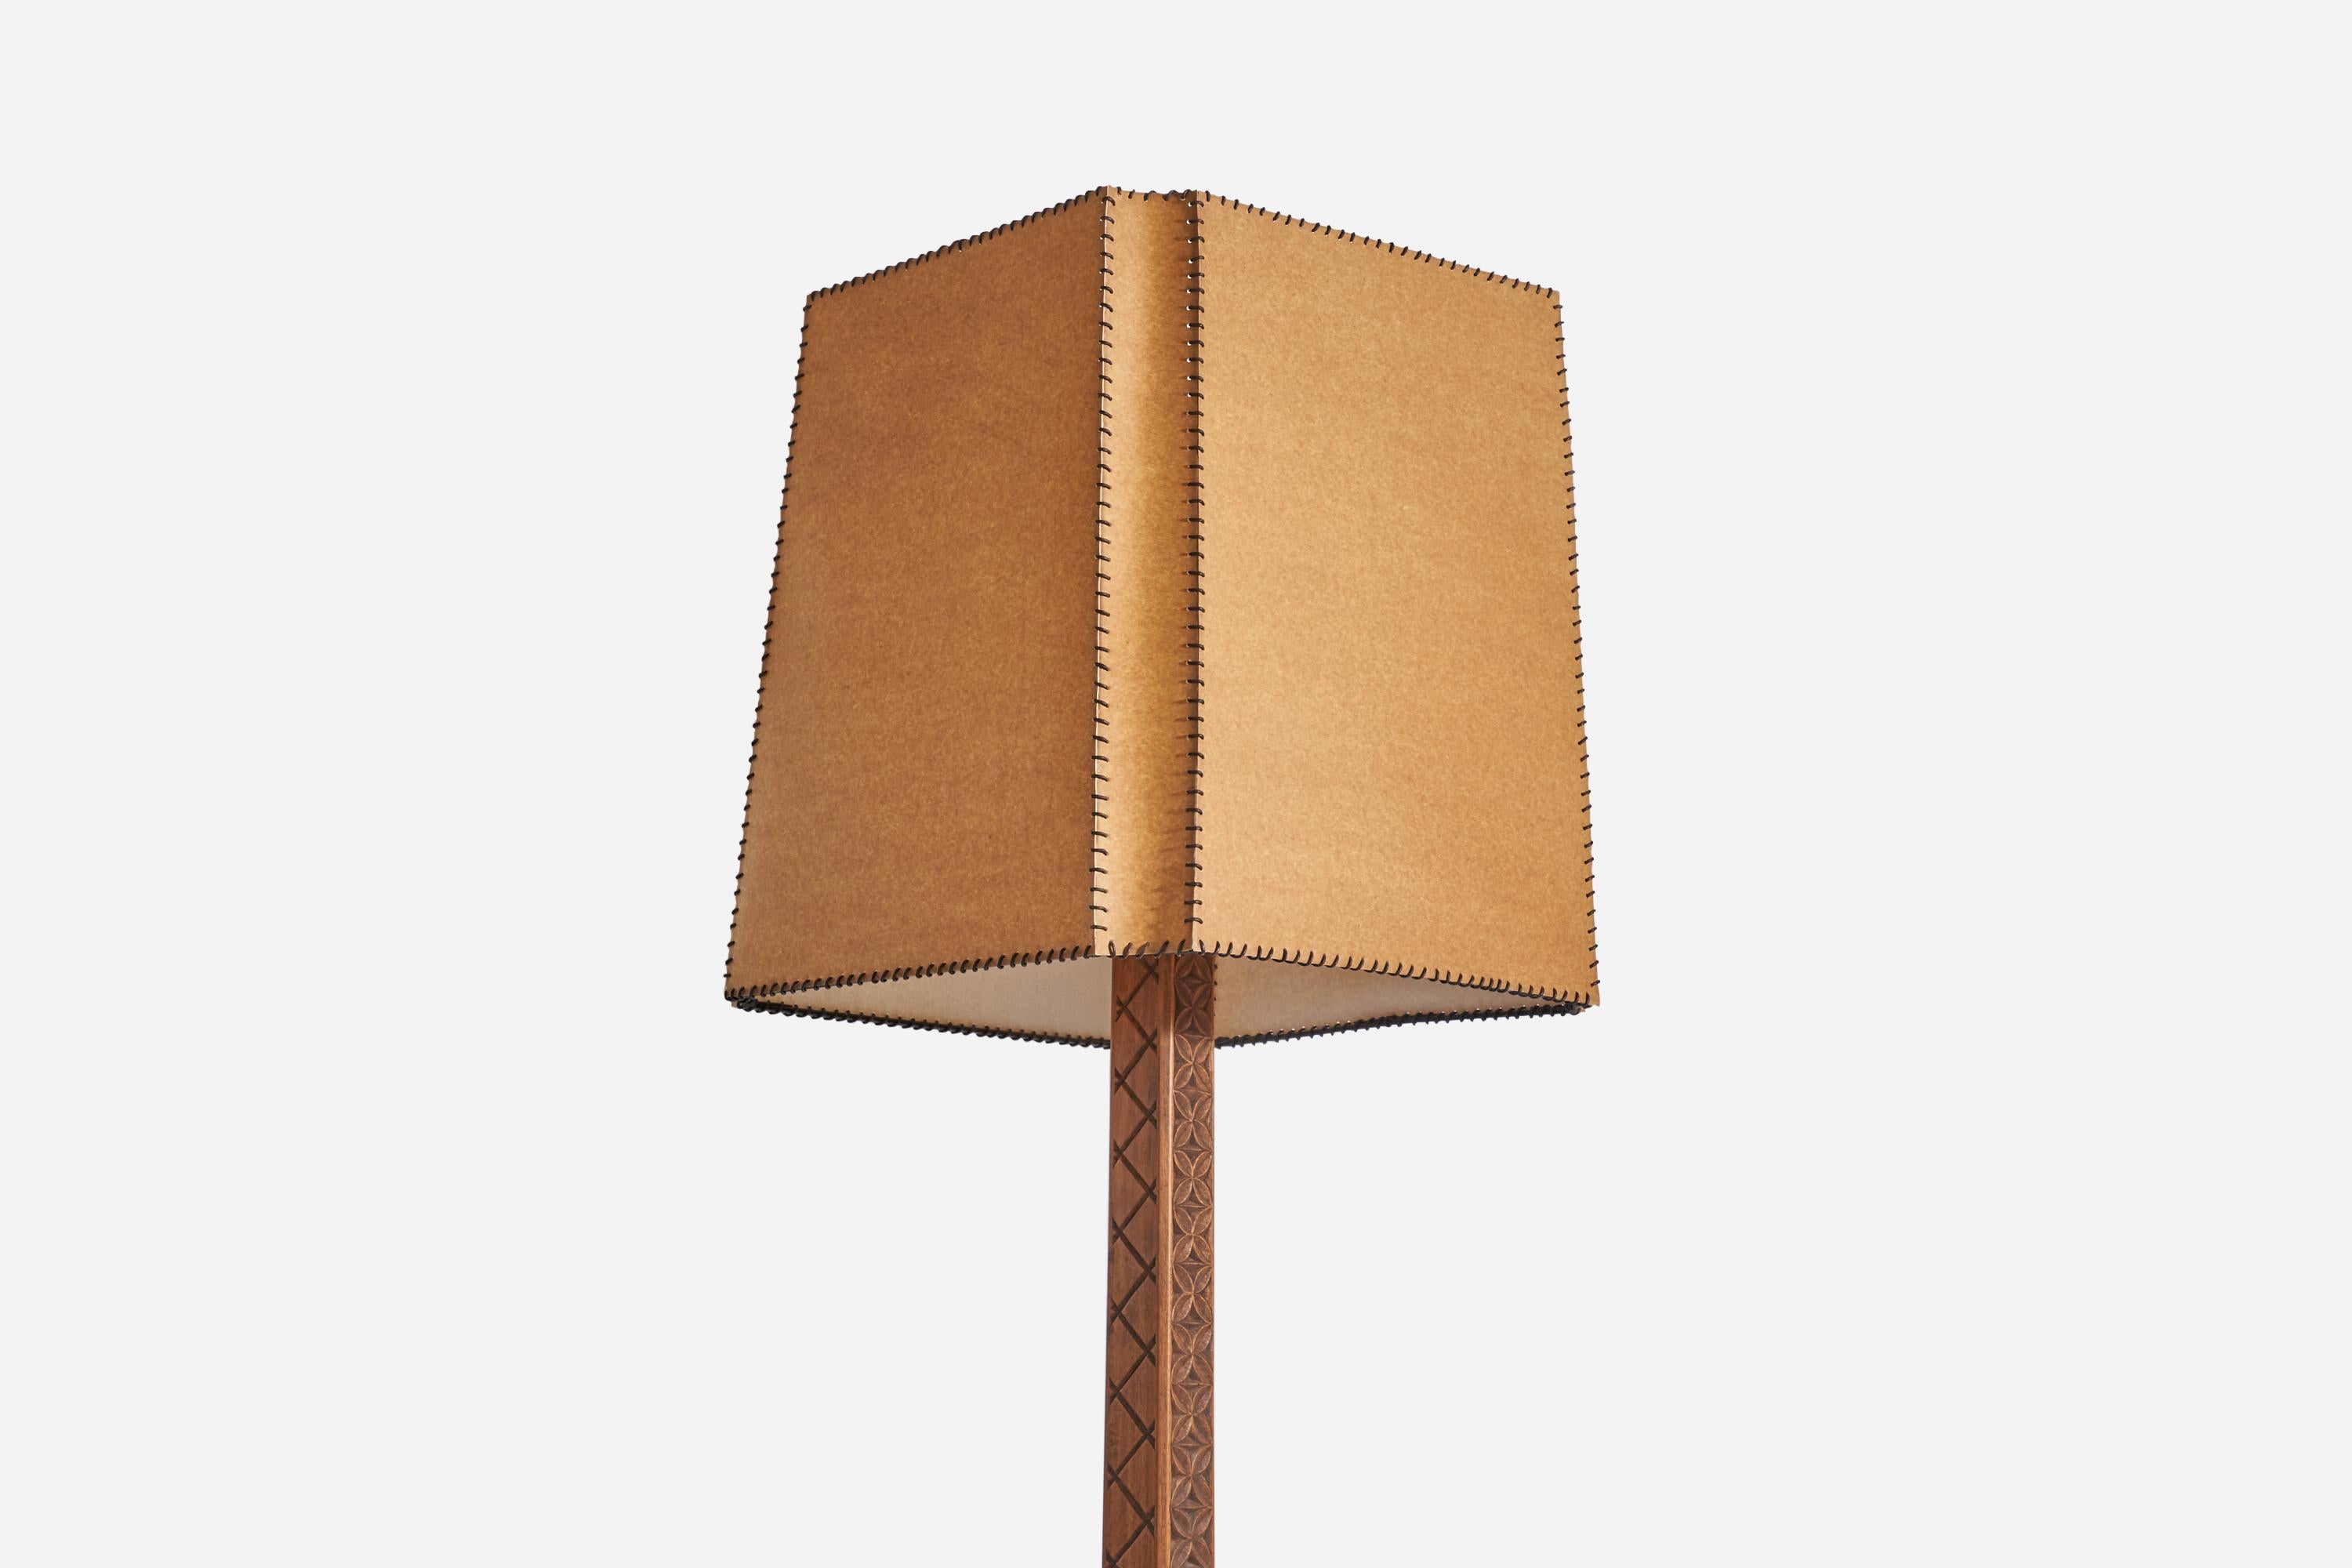 Late 20th Century American Designer, Floor Lamp, Wood, Paper, USA, 1976 For Sale